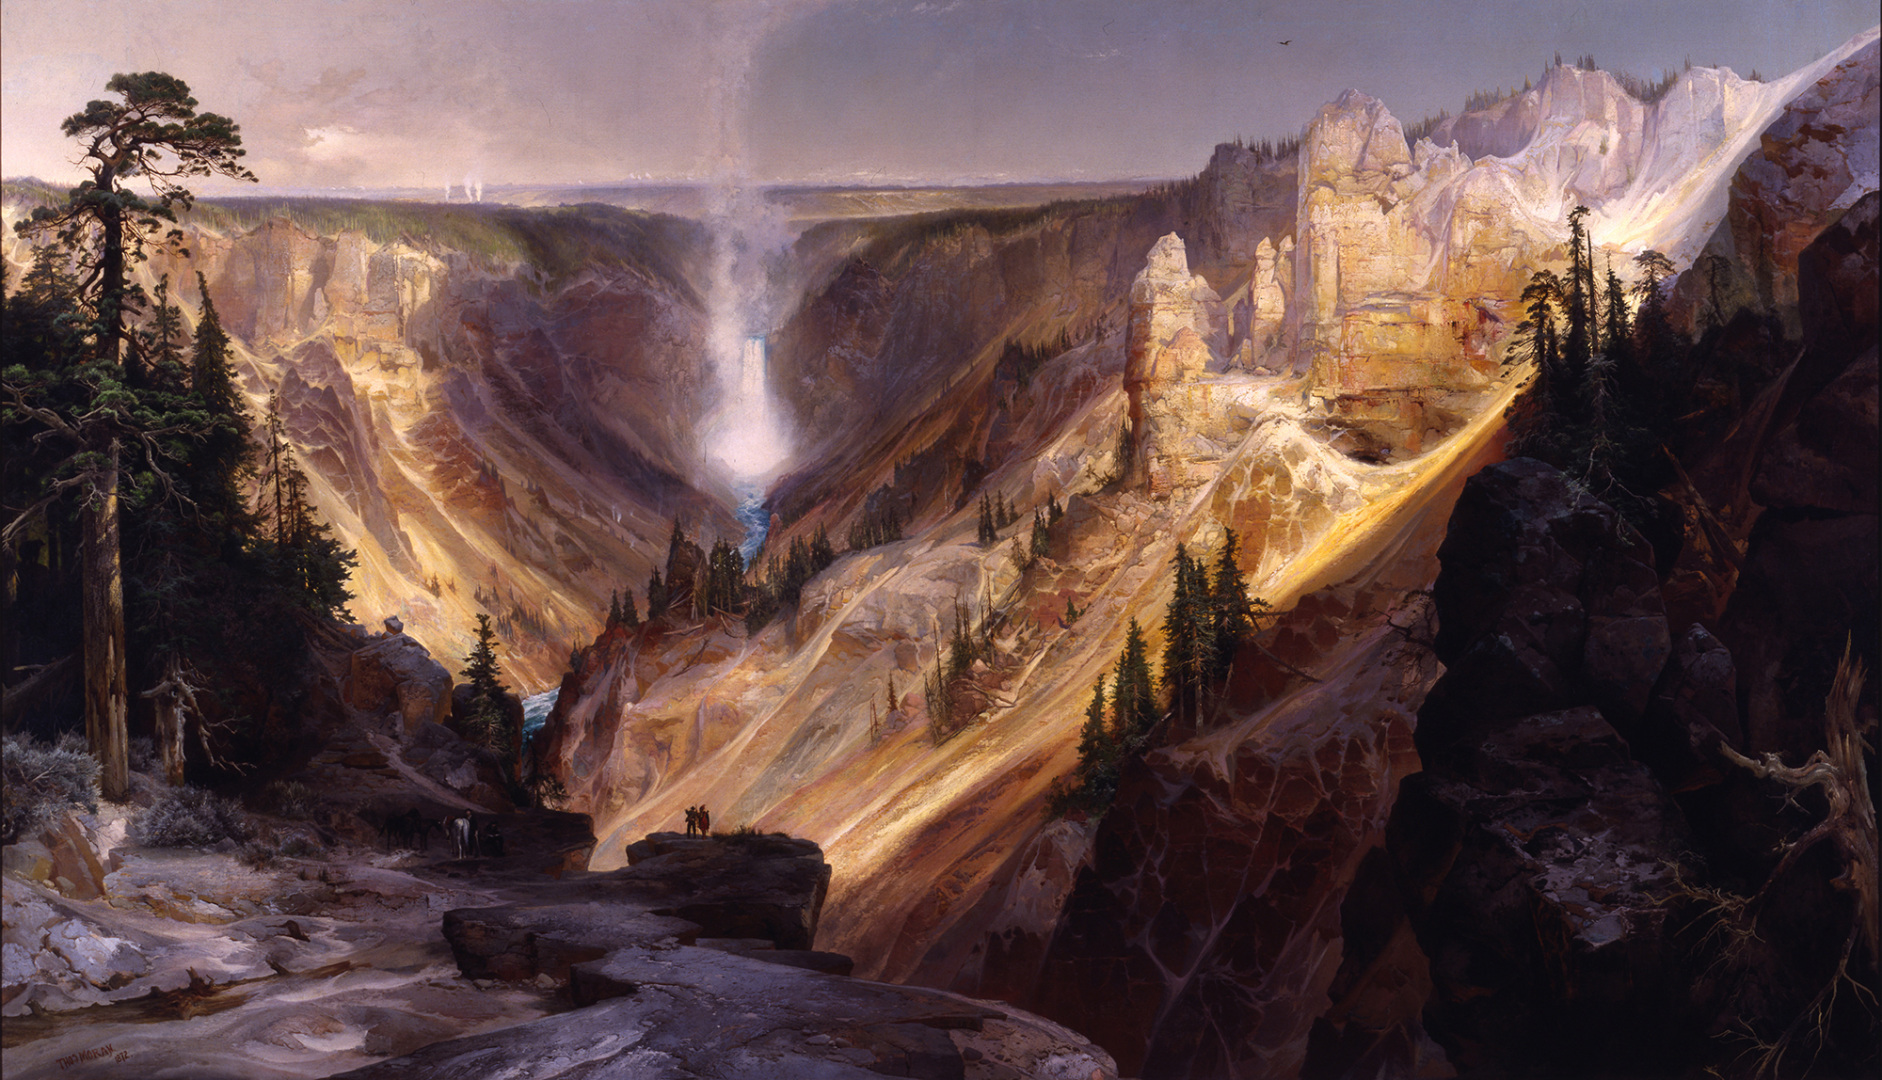 Grand Canyon of the Yellowstone by Thomas Moran, INTR 03001